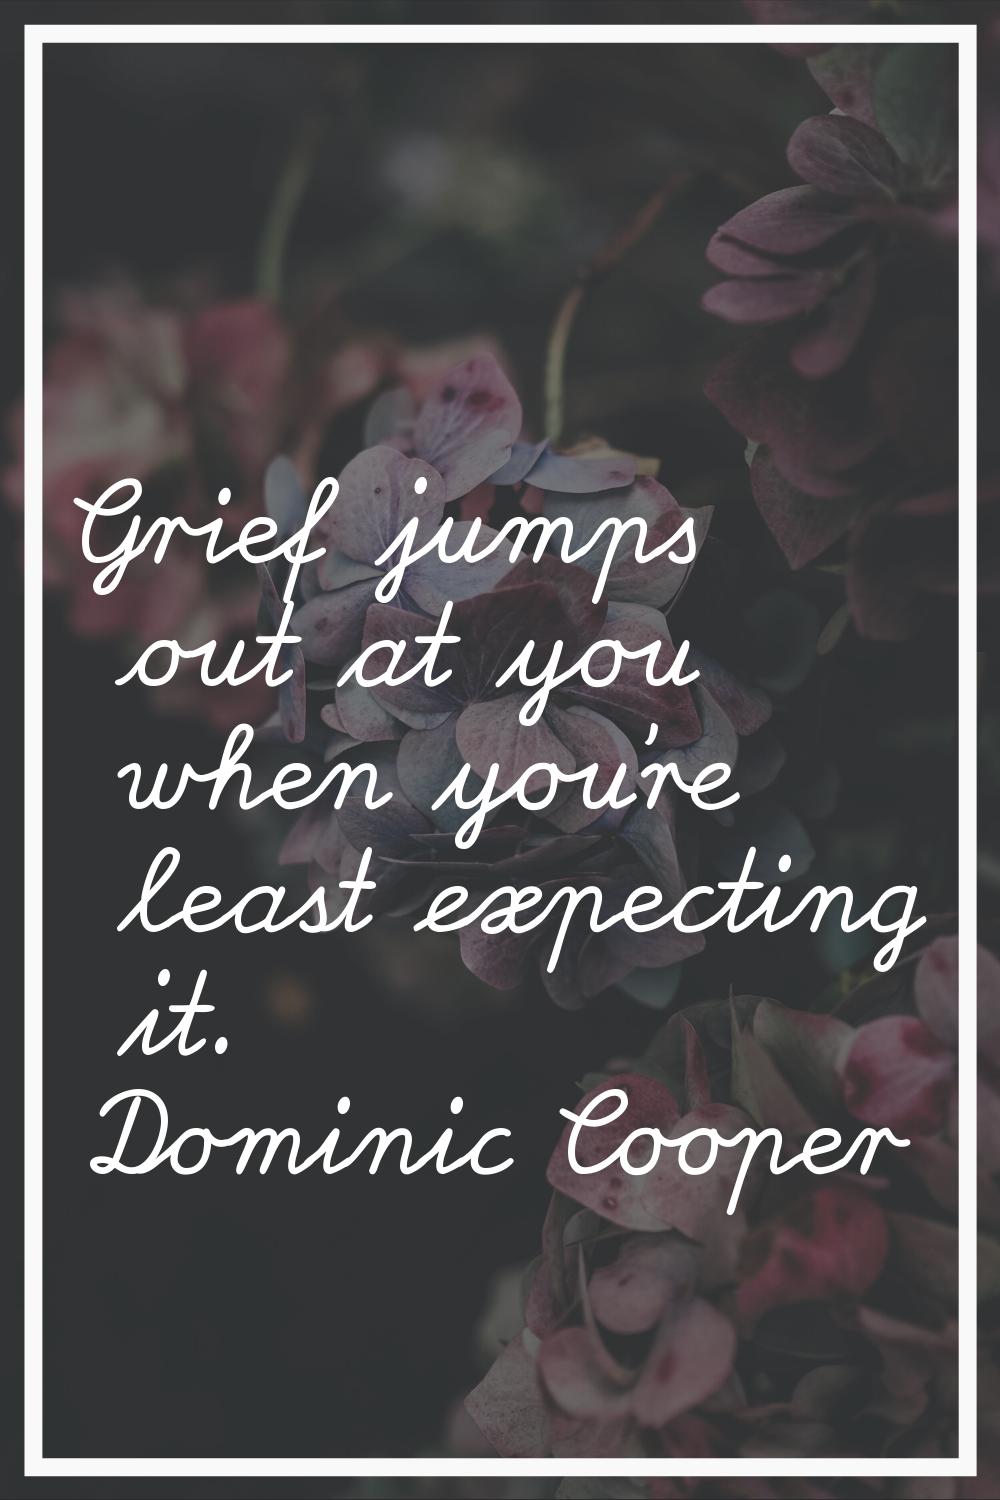 Grief jumps out at you when you're least expecting it.